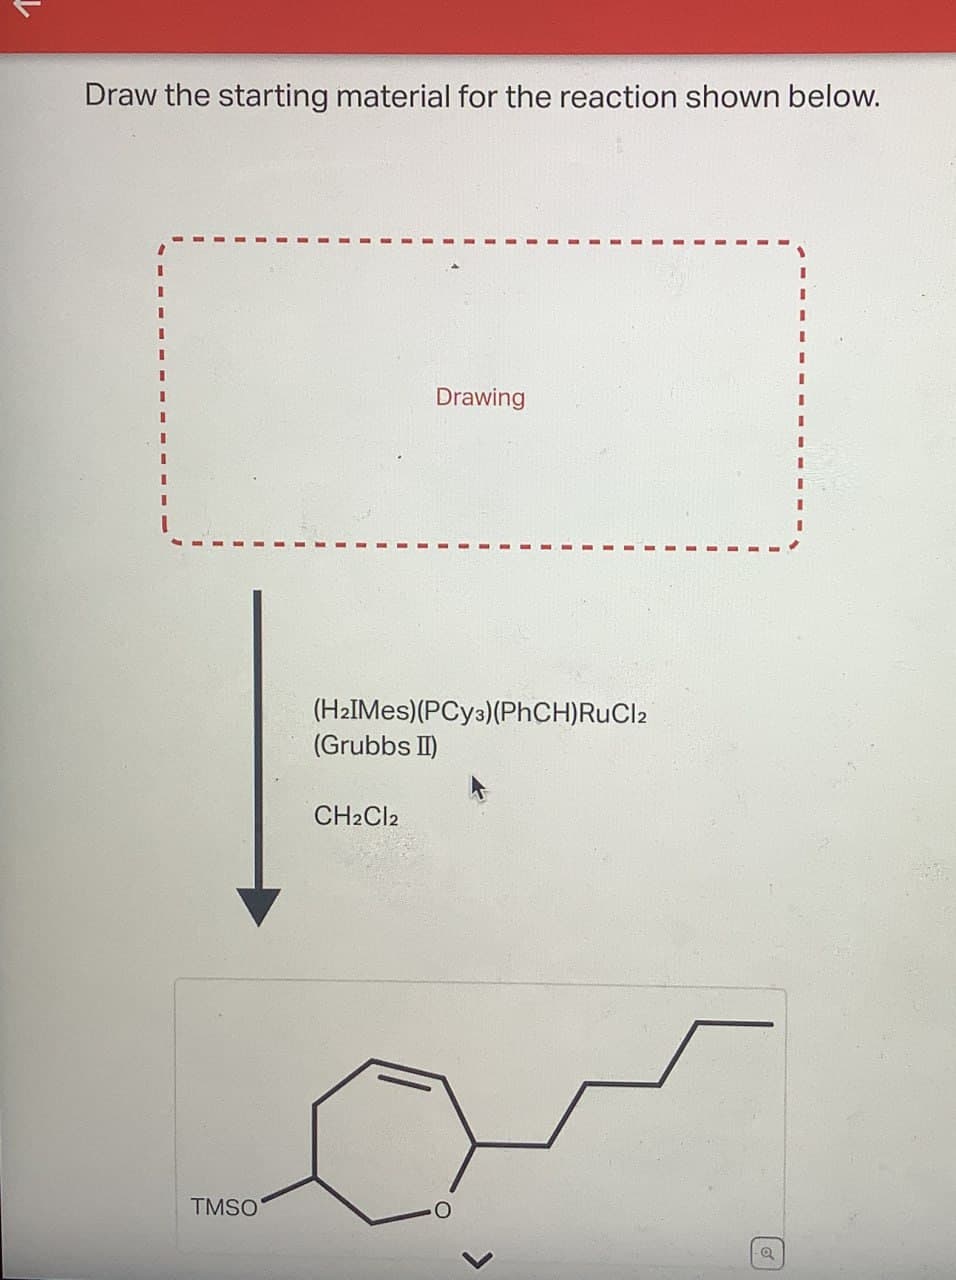 Draw the starting material for the reaction shown below.
TMSO
I
Drawing
(H2IMes)(PCy3)(PhCH)RuCl2
(Grubbs II)
CH2Cl2
a